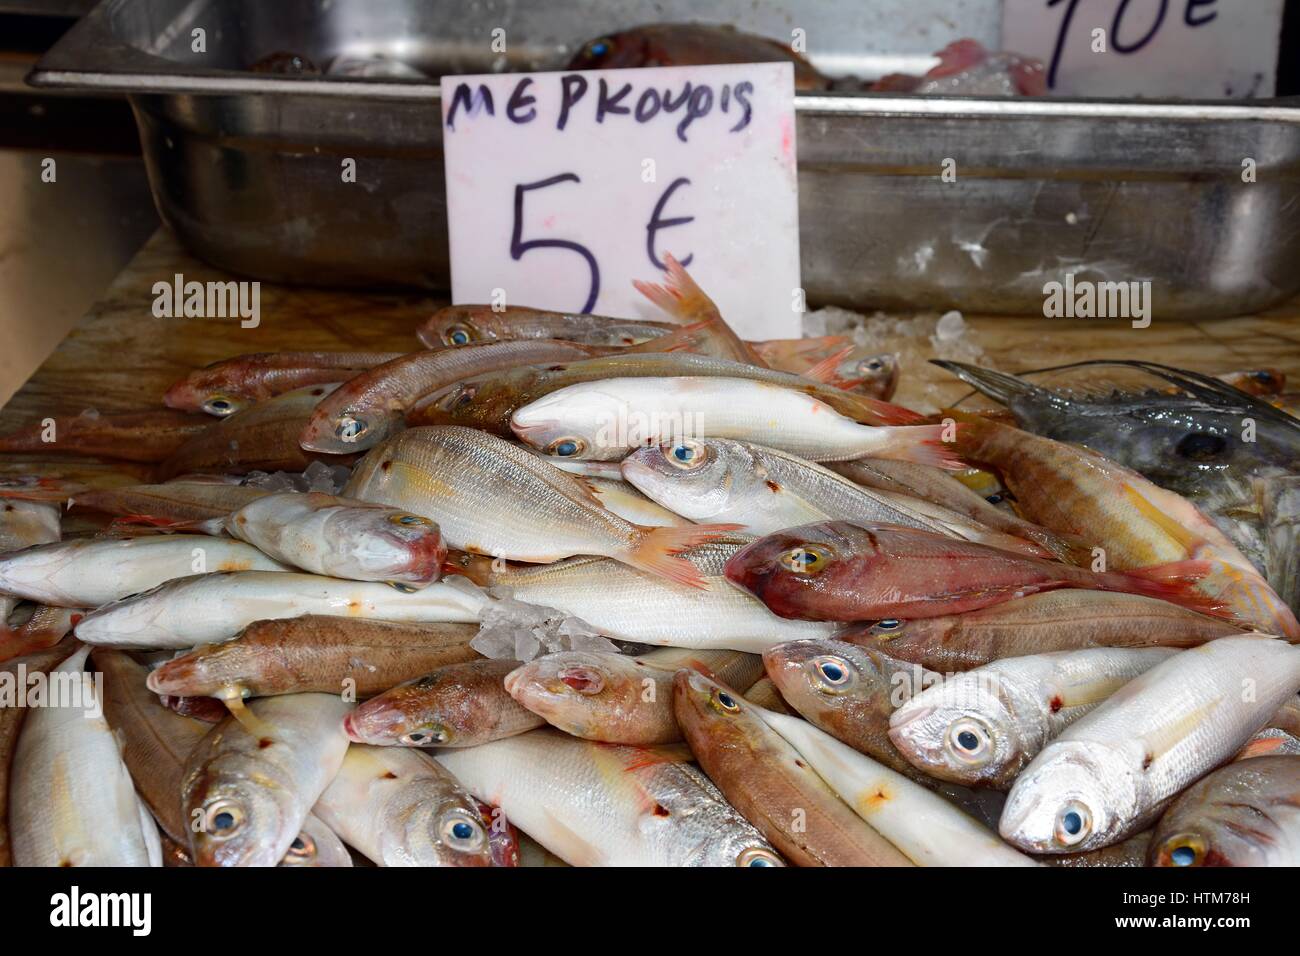 Red Mullet Crete Stock Photos & Red Mullet Crete Stock Images - Alamy